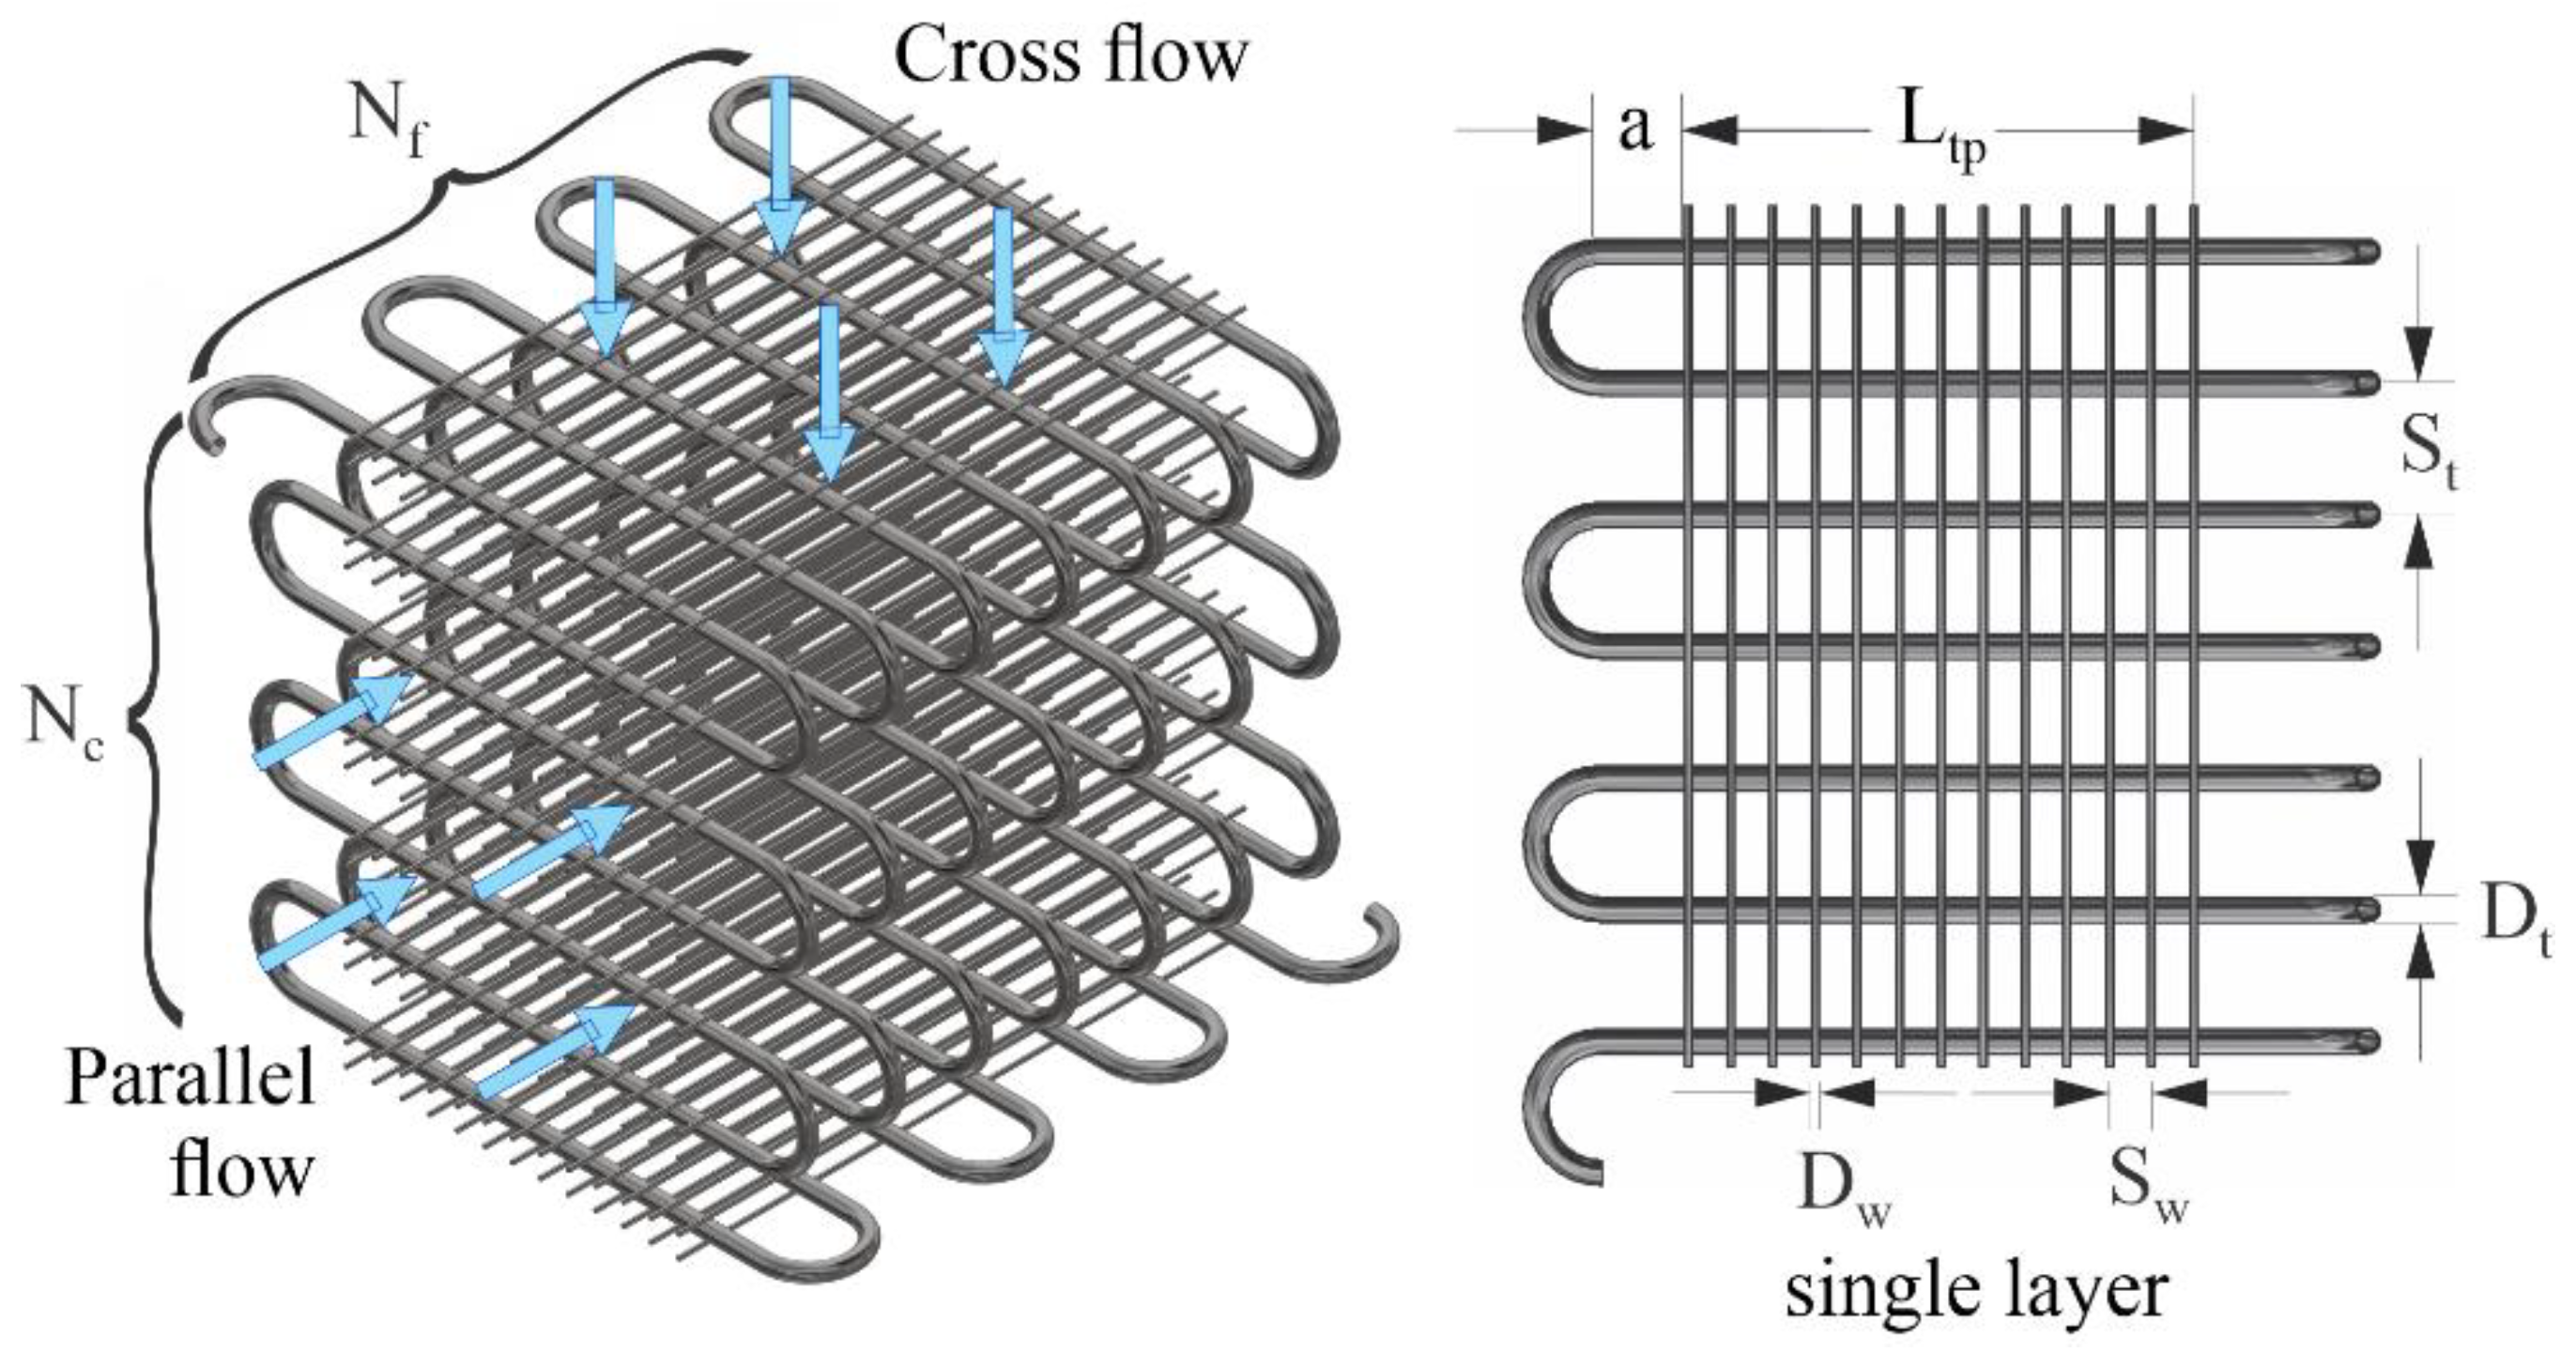 Energies | Free Full-Text | Multi-Objective Optimization of a Multilayer  Wire-on-Tube Condenser: Case Study R134a, R600a, and R513A